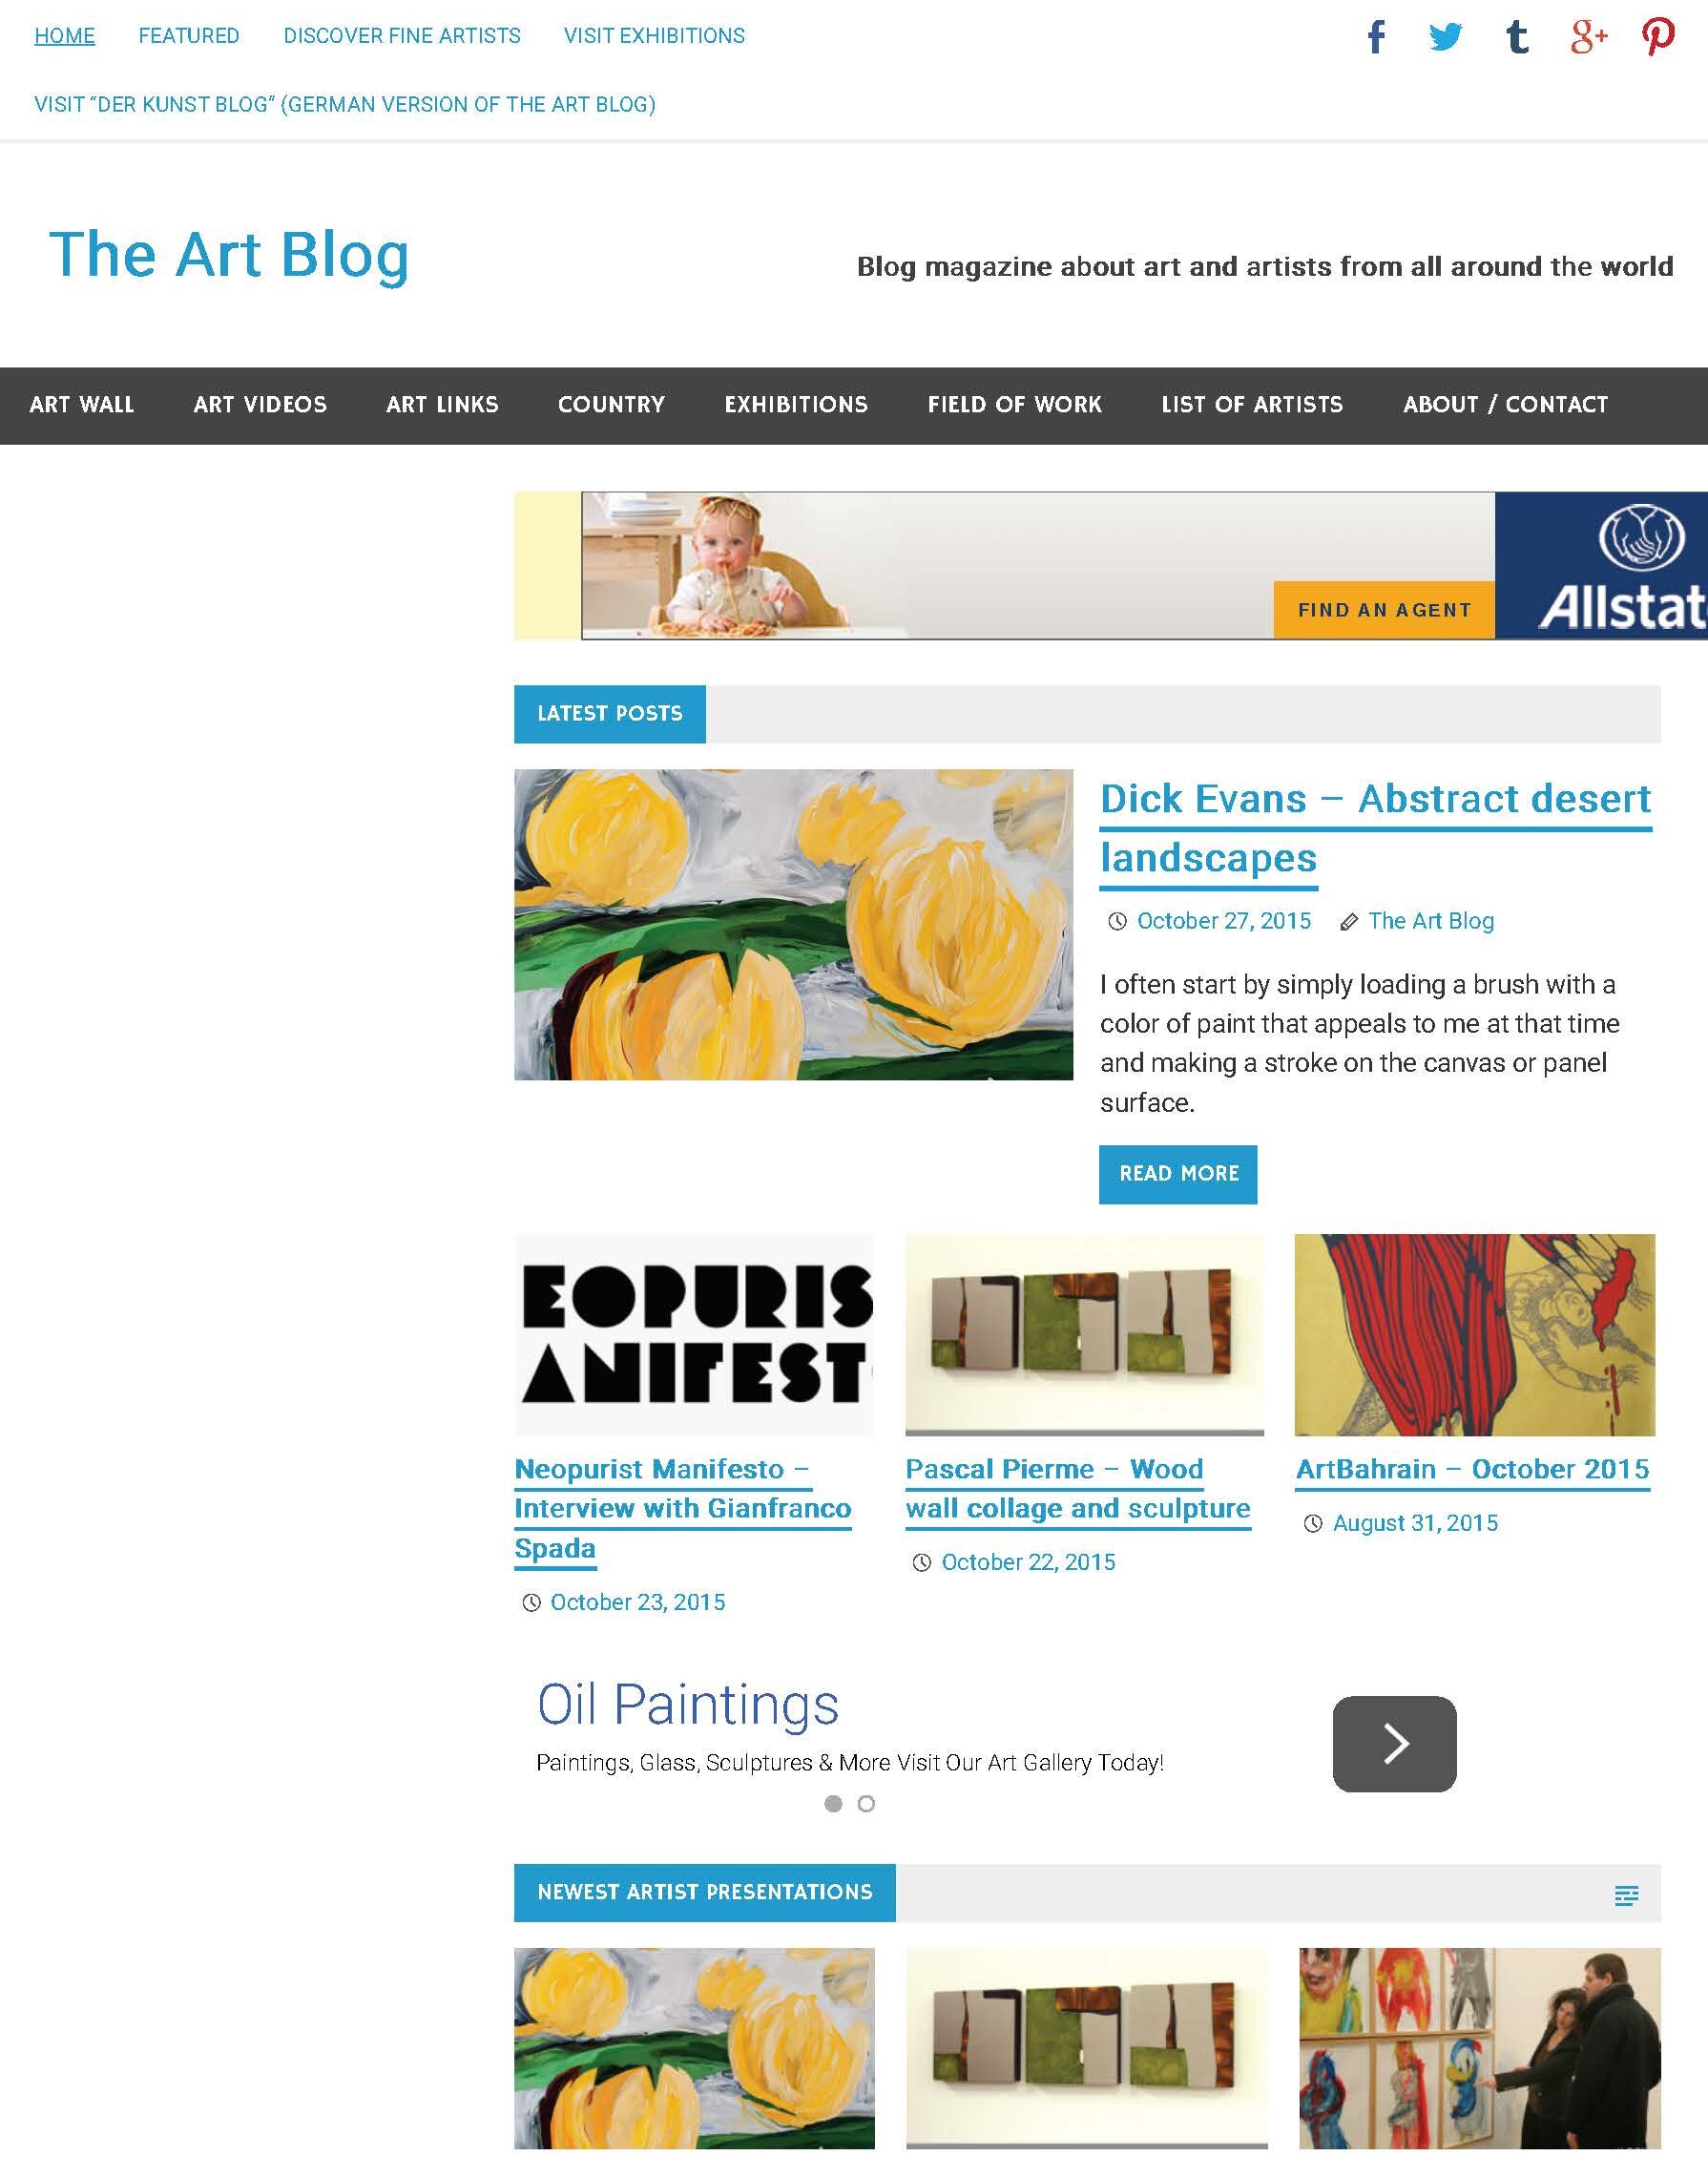 The Art Blog | Blog magazine about art and artists from all around the world-10-27-15_Page_1.jpg